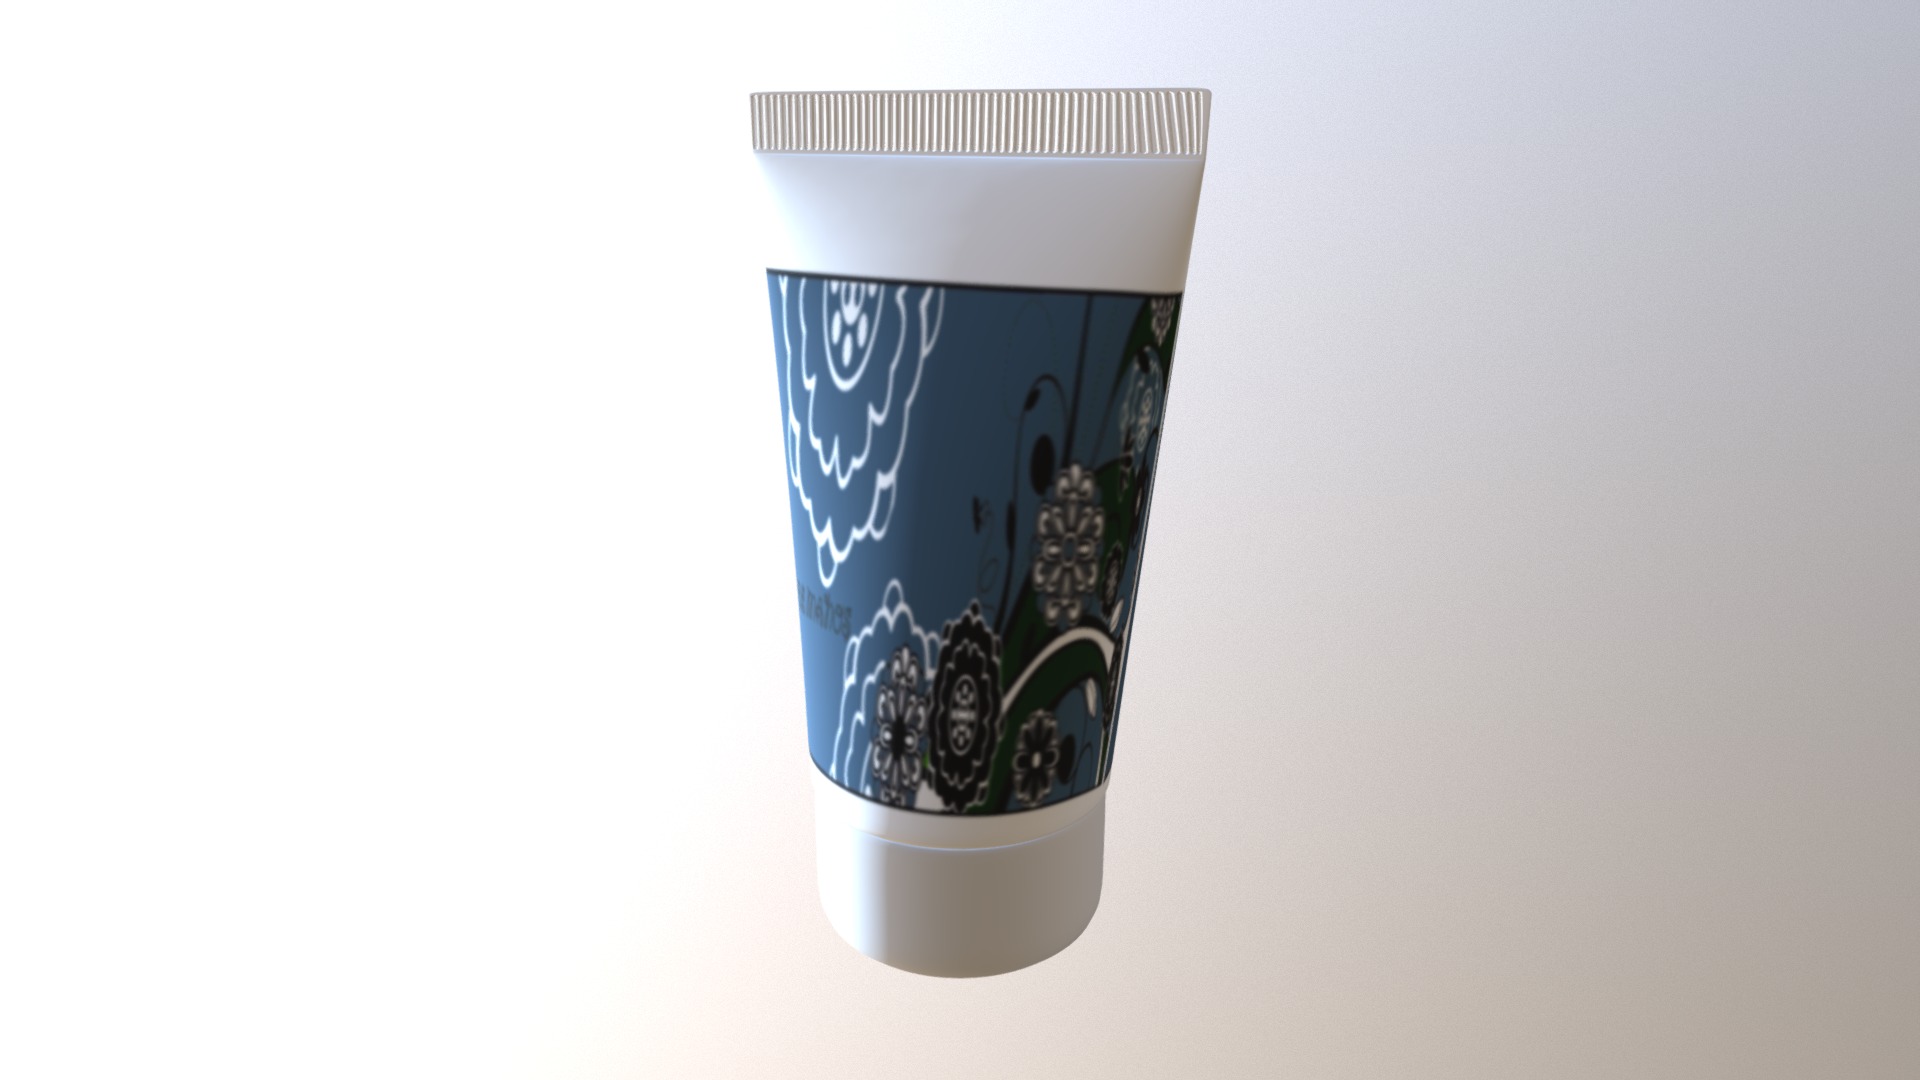 3D model Cream tube - This is a 3D model of the Cream tube. The 3D model is about a glass of milk.